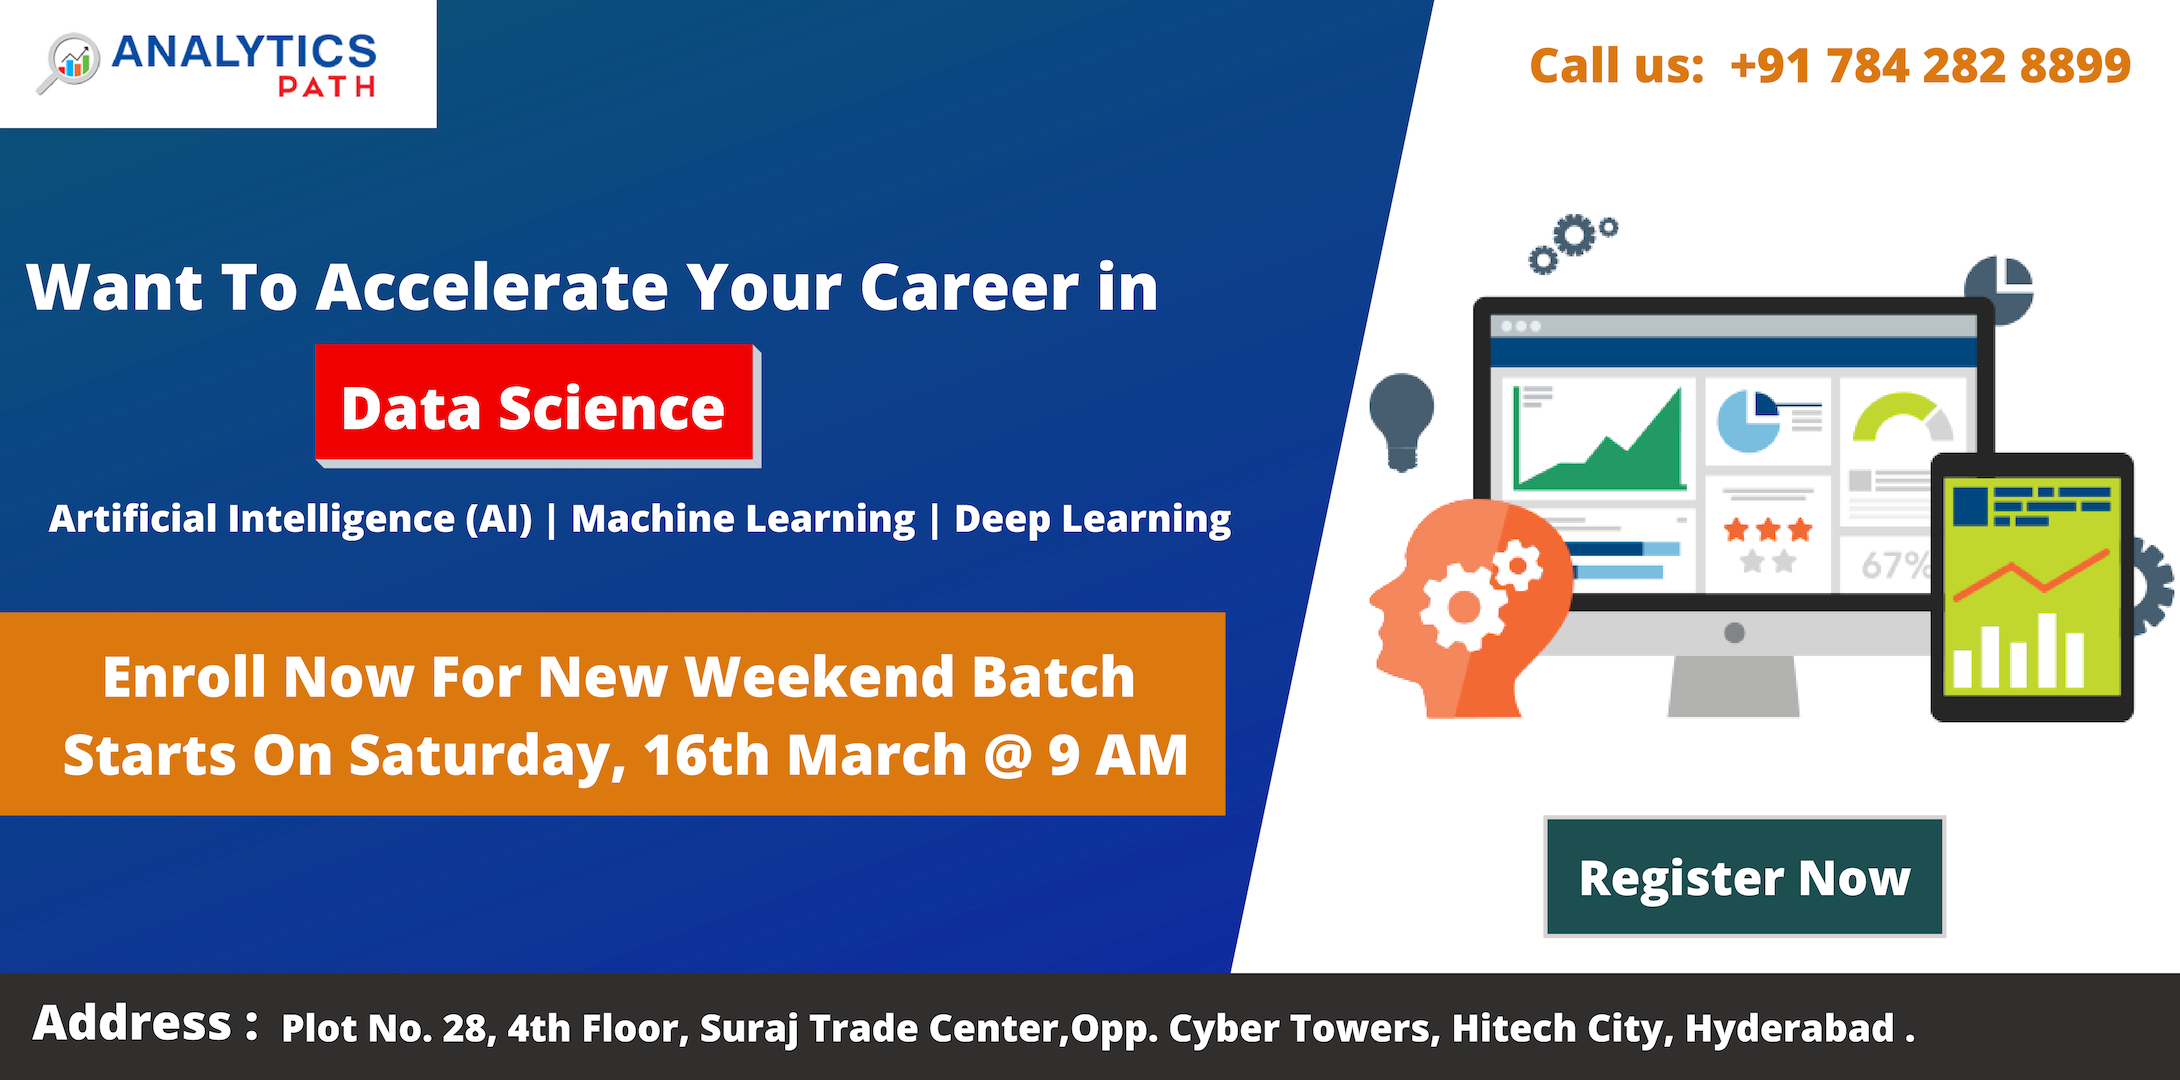 Enroll For Free Workshop Session On Data Science Training-Attended By Experts In Analytics Path Scheduled On 16th March, 9 AM, In Hyderabad, Hyderabad, Telangana, India